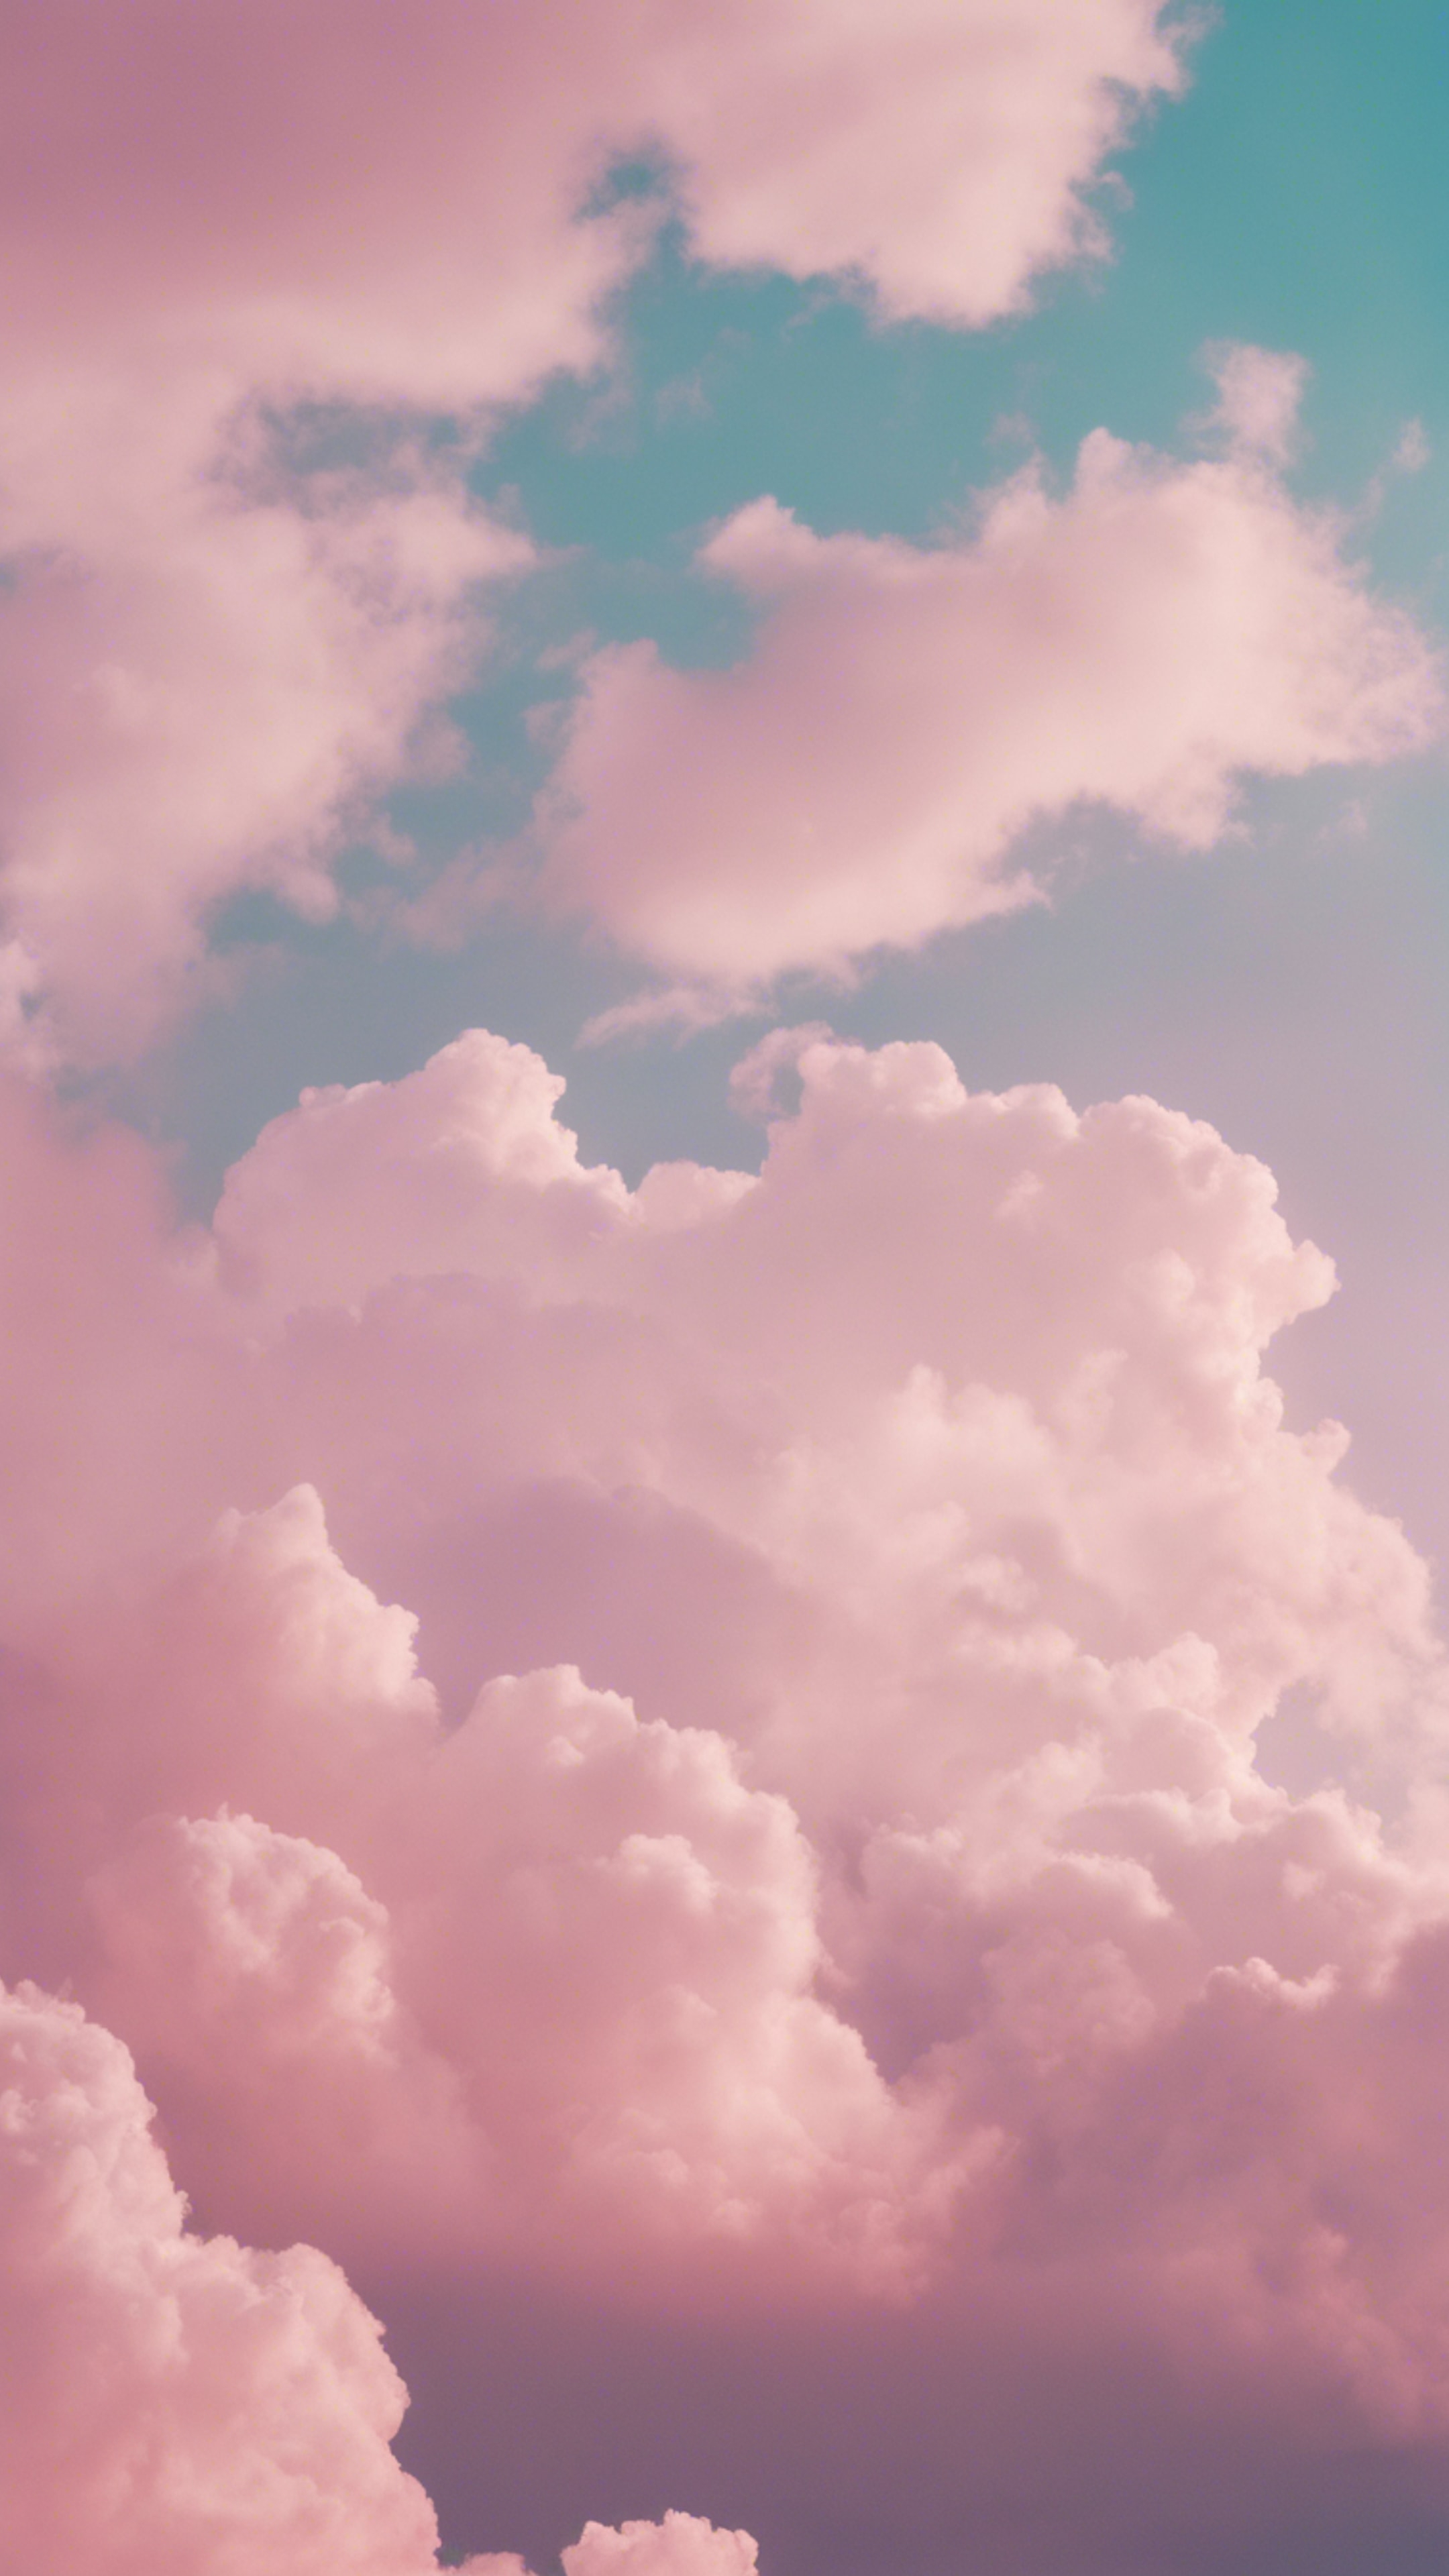 A surreal sky with a mix of pastel tones influenced by Y2K digital aesthetic.壁紙[d53cf796167a434cb2de]